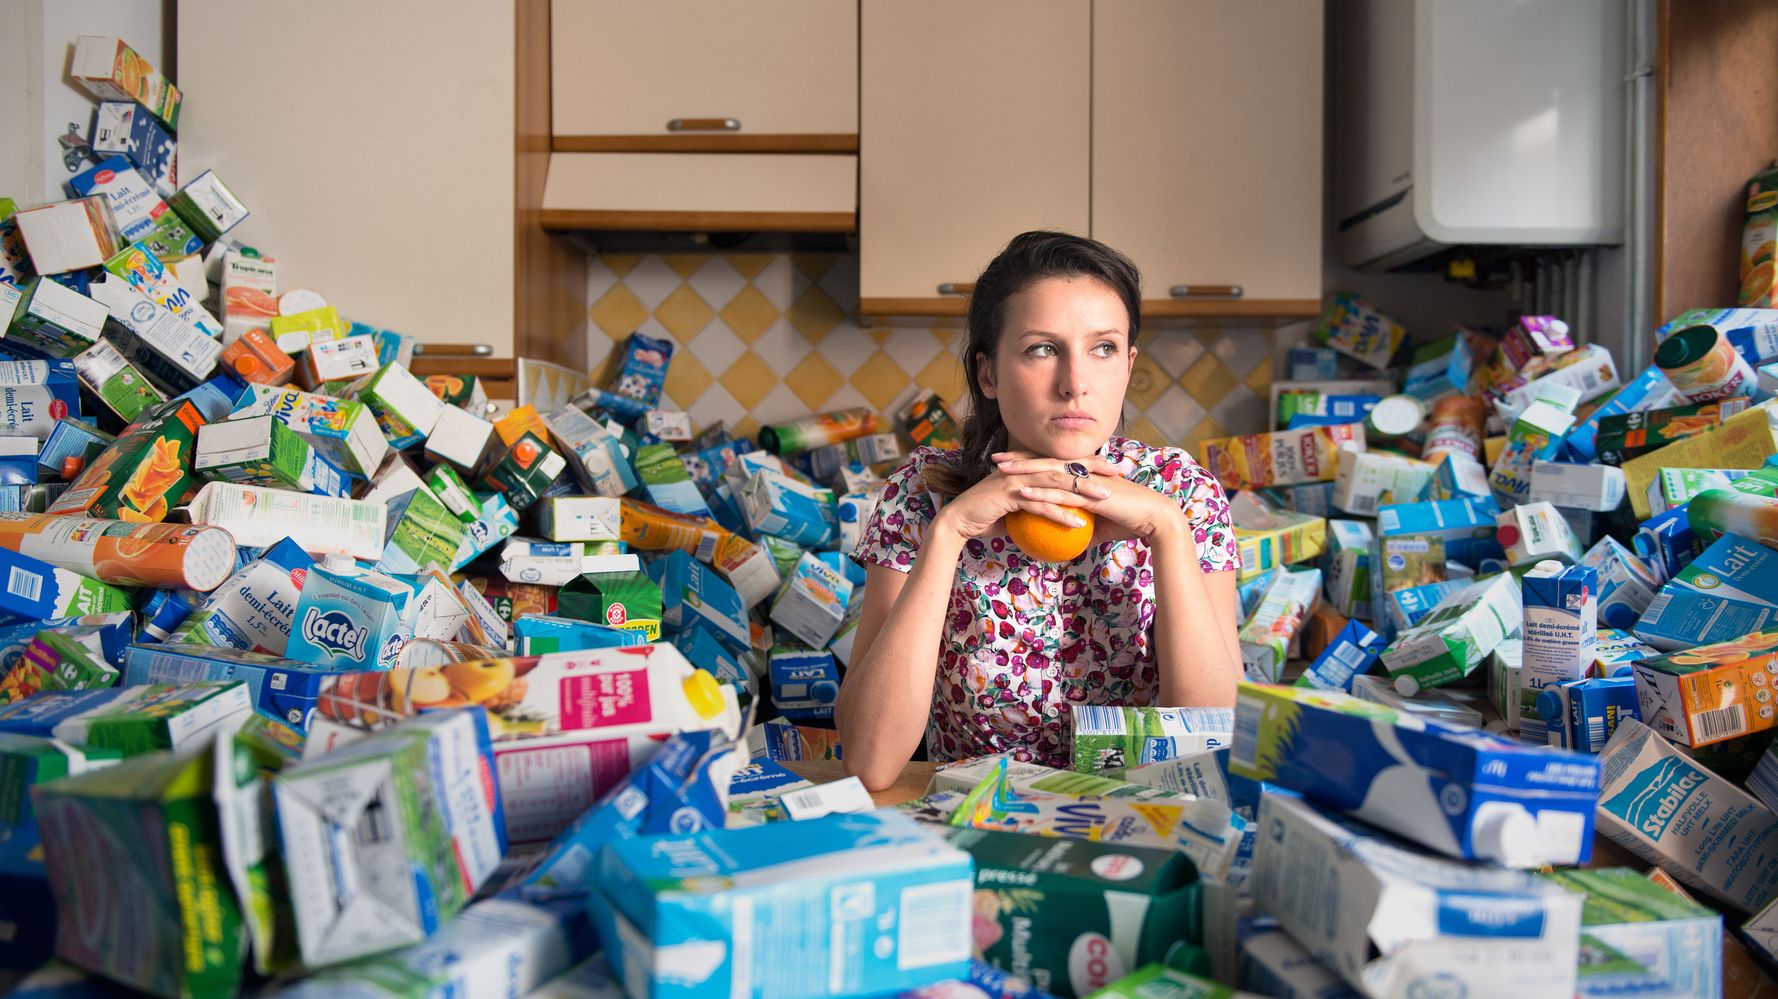 A Photographer Collected Four Years Worth Of Trash To Show Just How Wasteful Humans Can Be